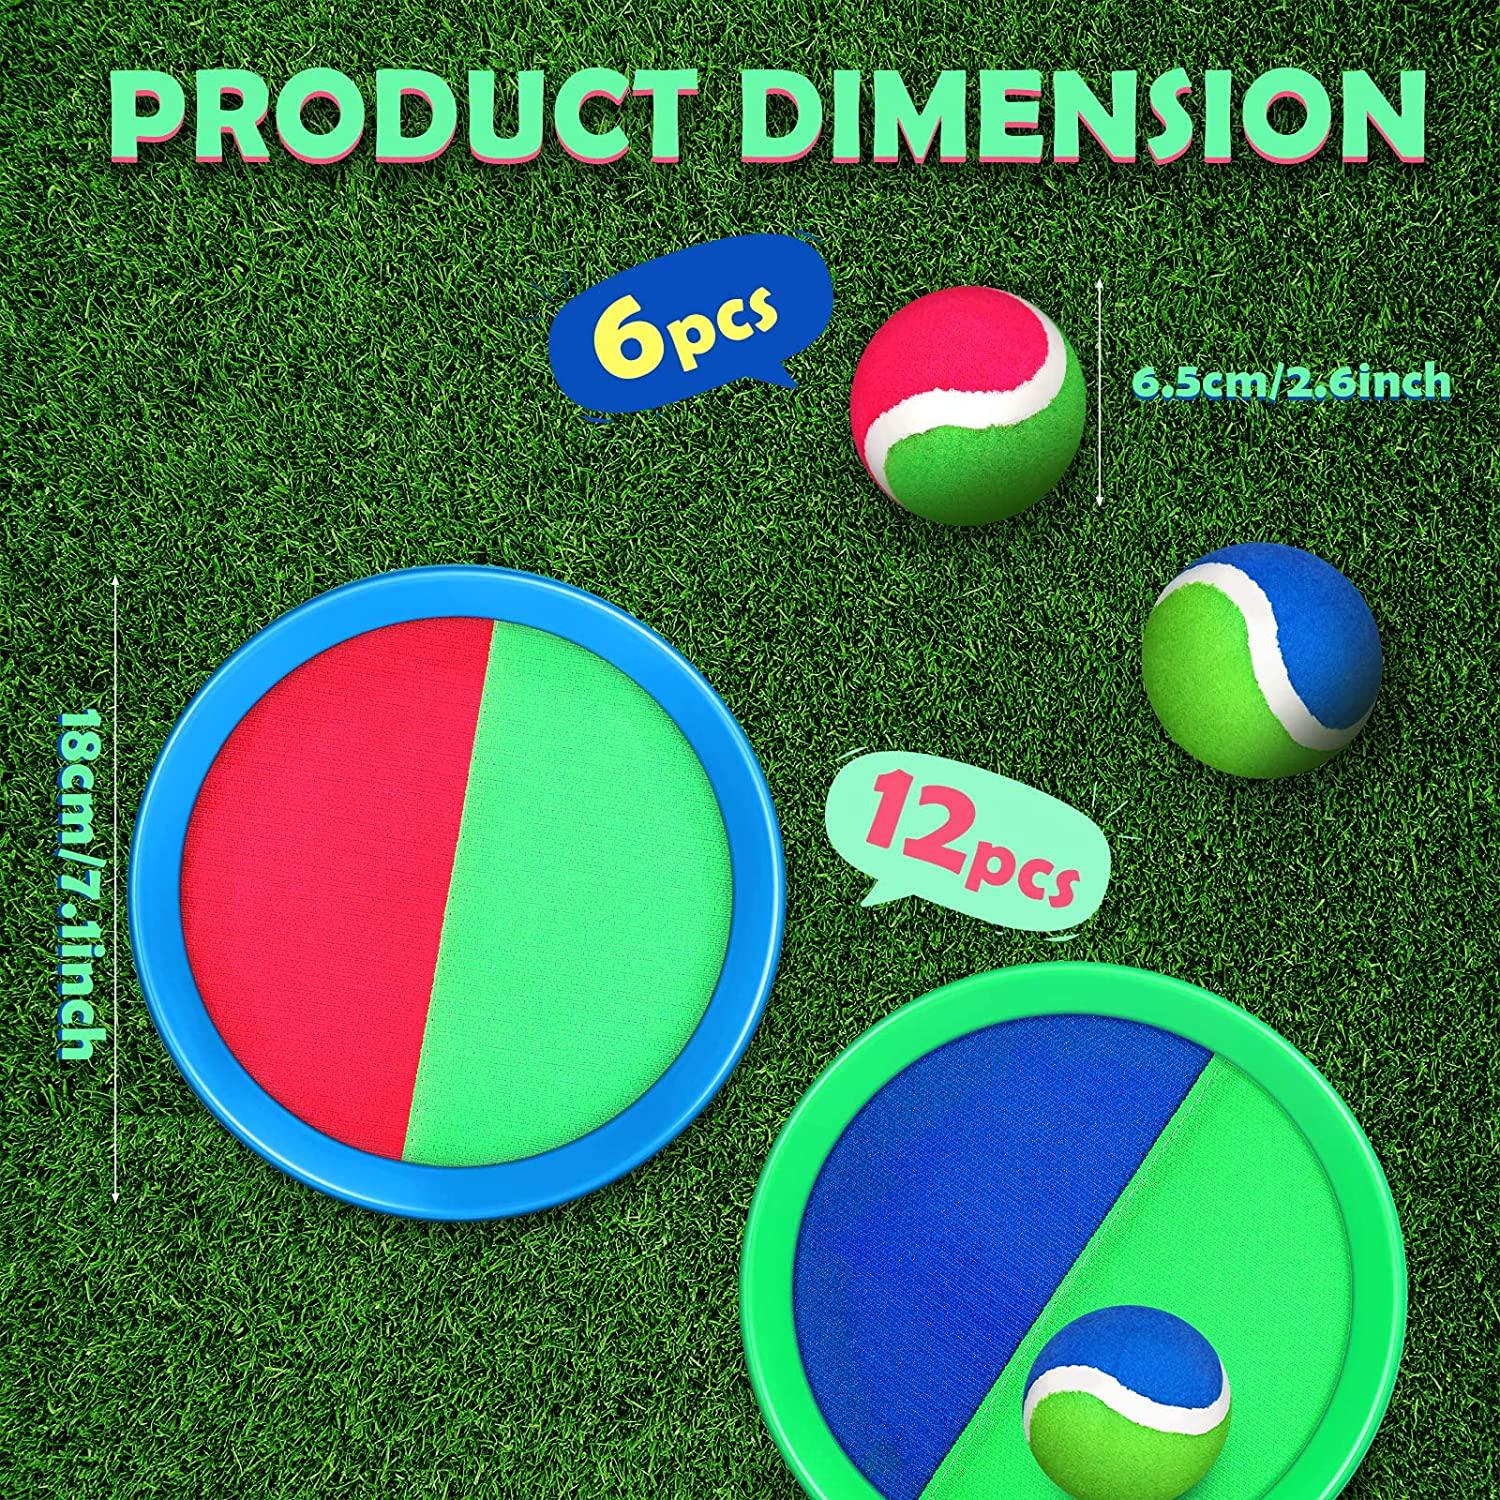 Charniol, Kids Toys Toss and Catch Game Set 12 Paddles 6 Balls Beach Game Outdoor Ball Sports Games Toss and Catch Ball Set with Paddles Ball Nylon Catch Toys for Kids Adults Playground